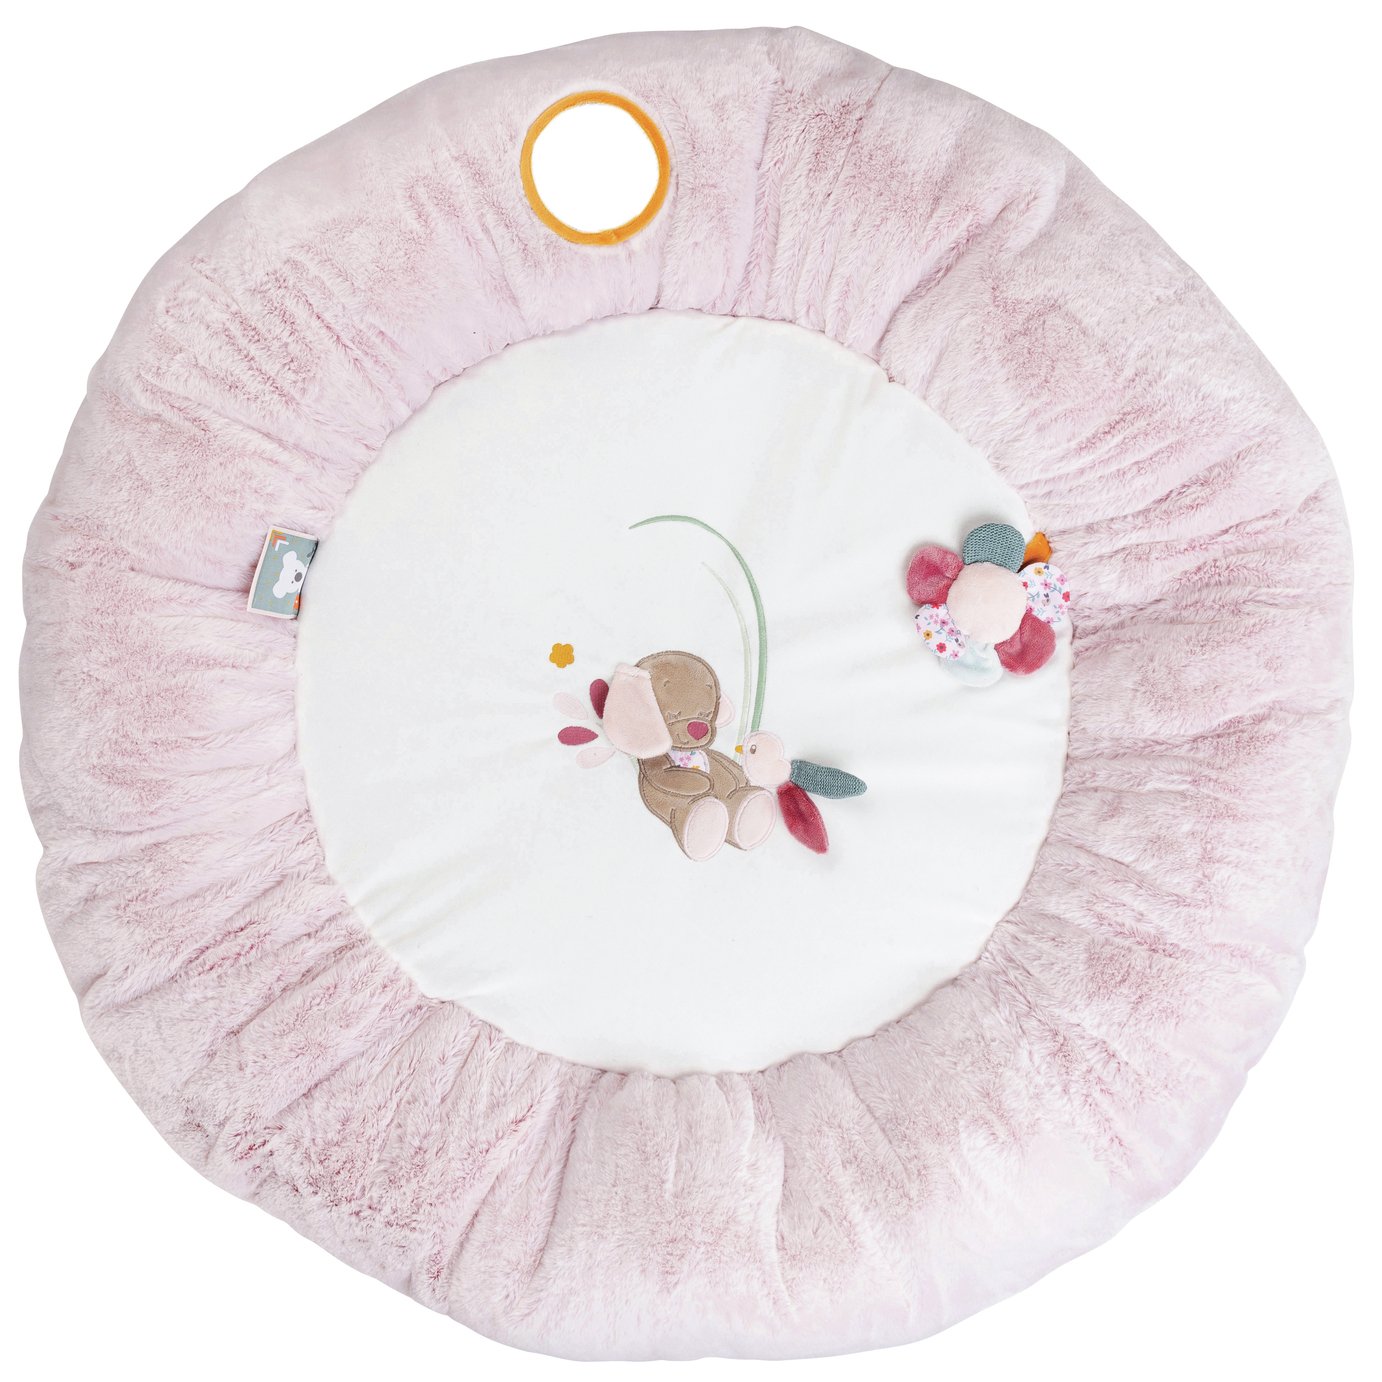 Nattou Iris and Lali Stuffed Playmat with Arches Review